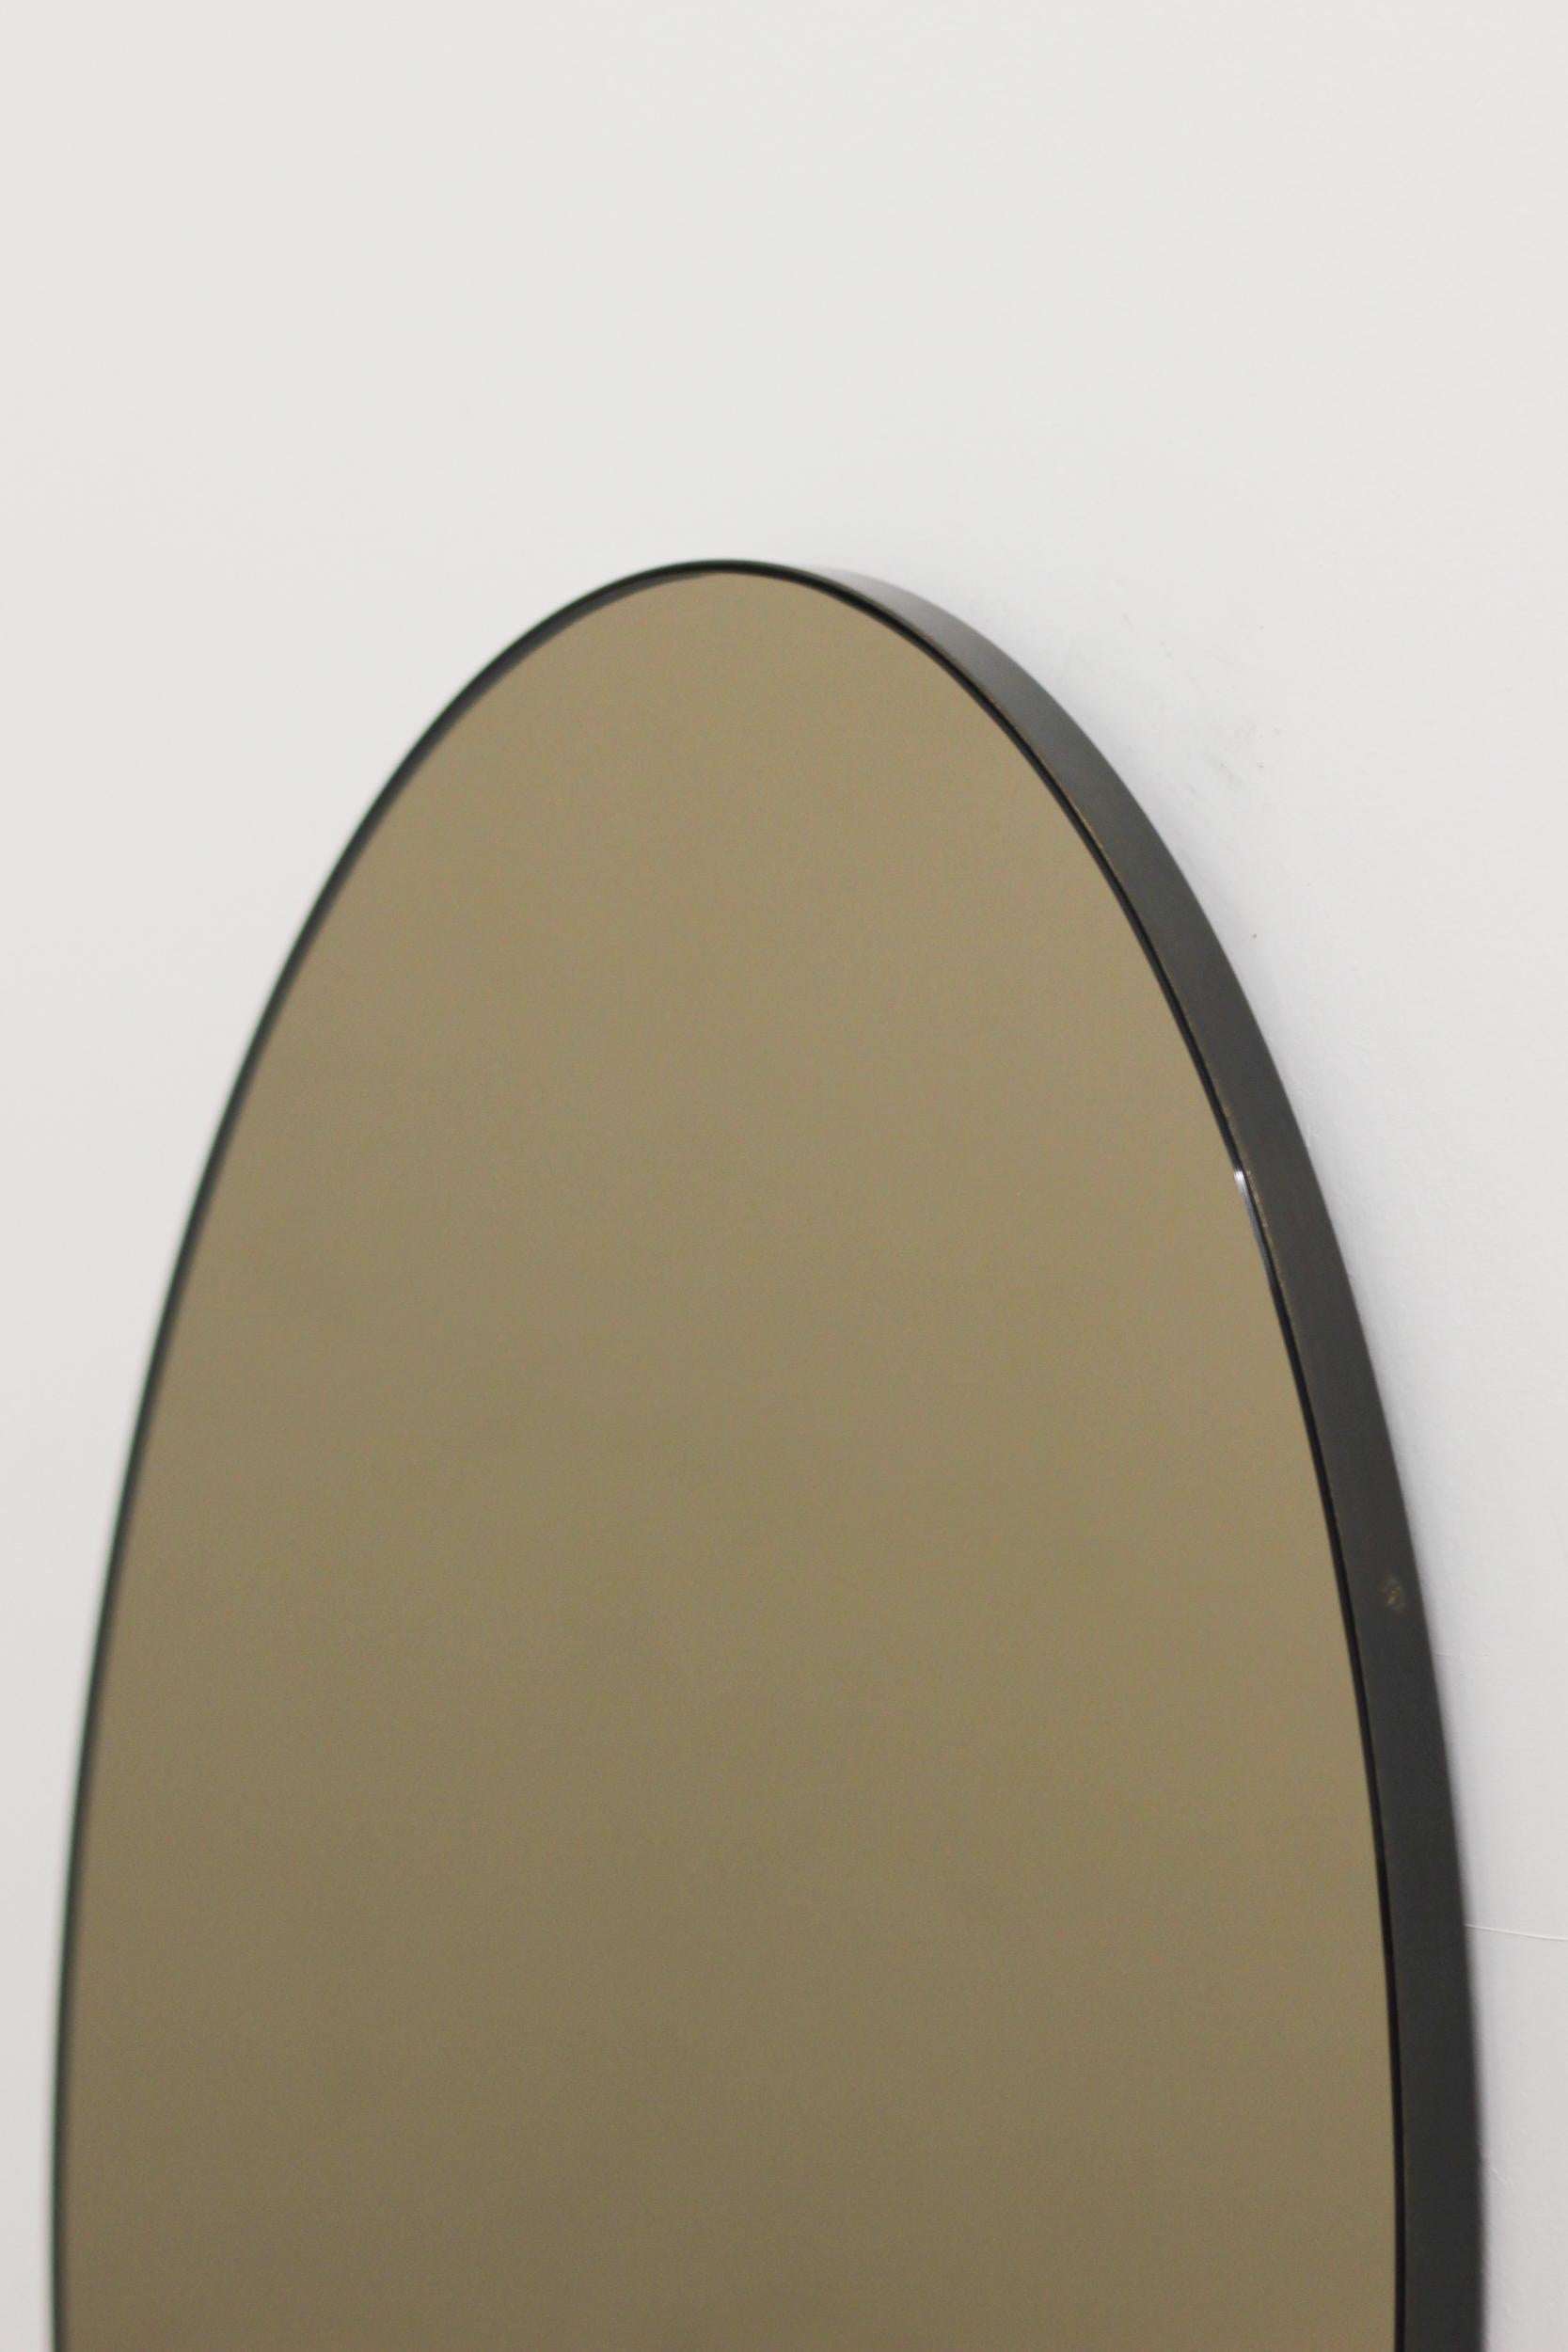 Organic Modern Ovalis Oval Bronze Tinted Contemporary Mirror with Patina Frame, Small For Sale